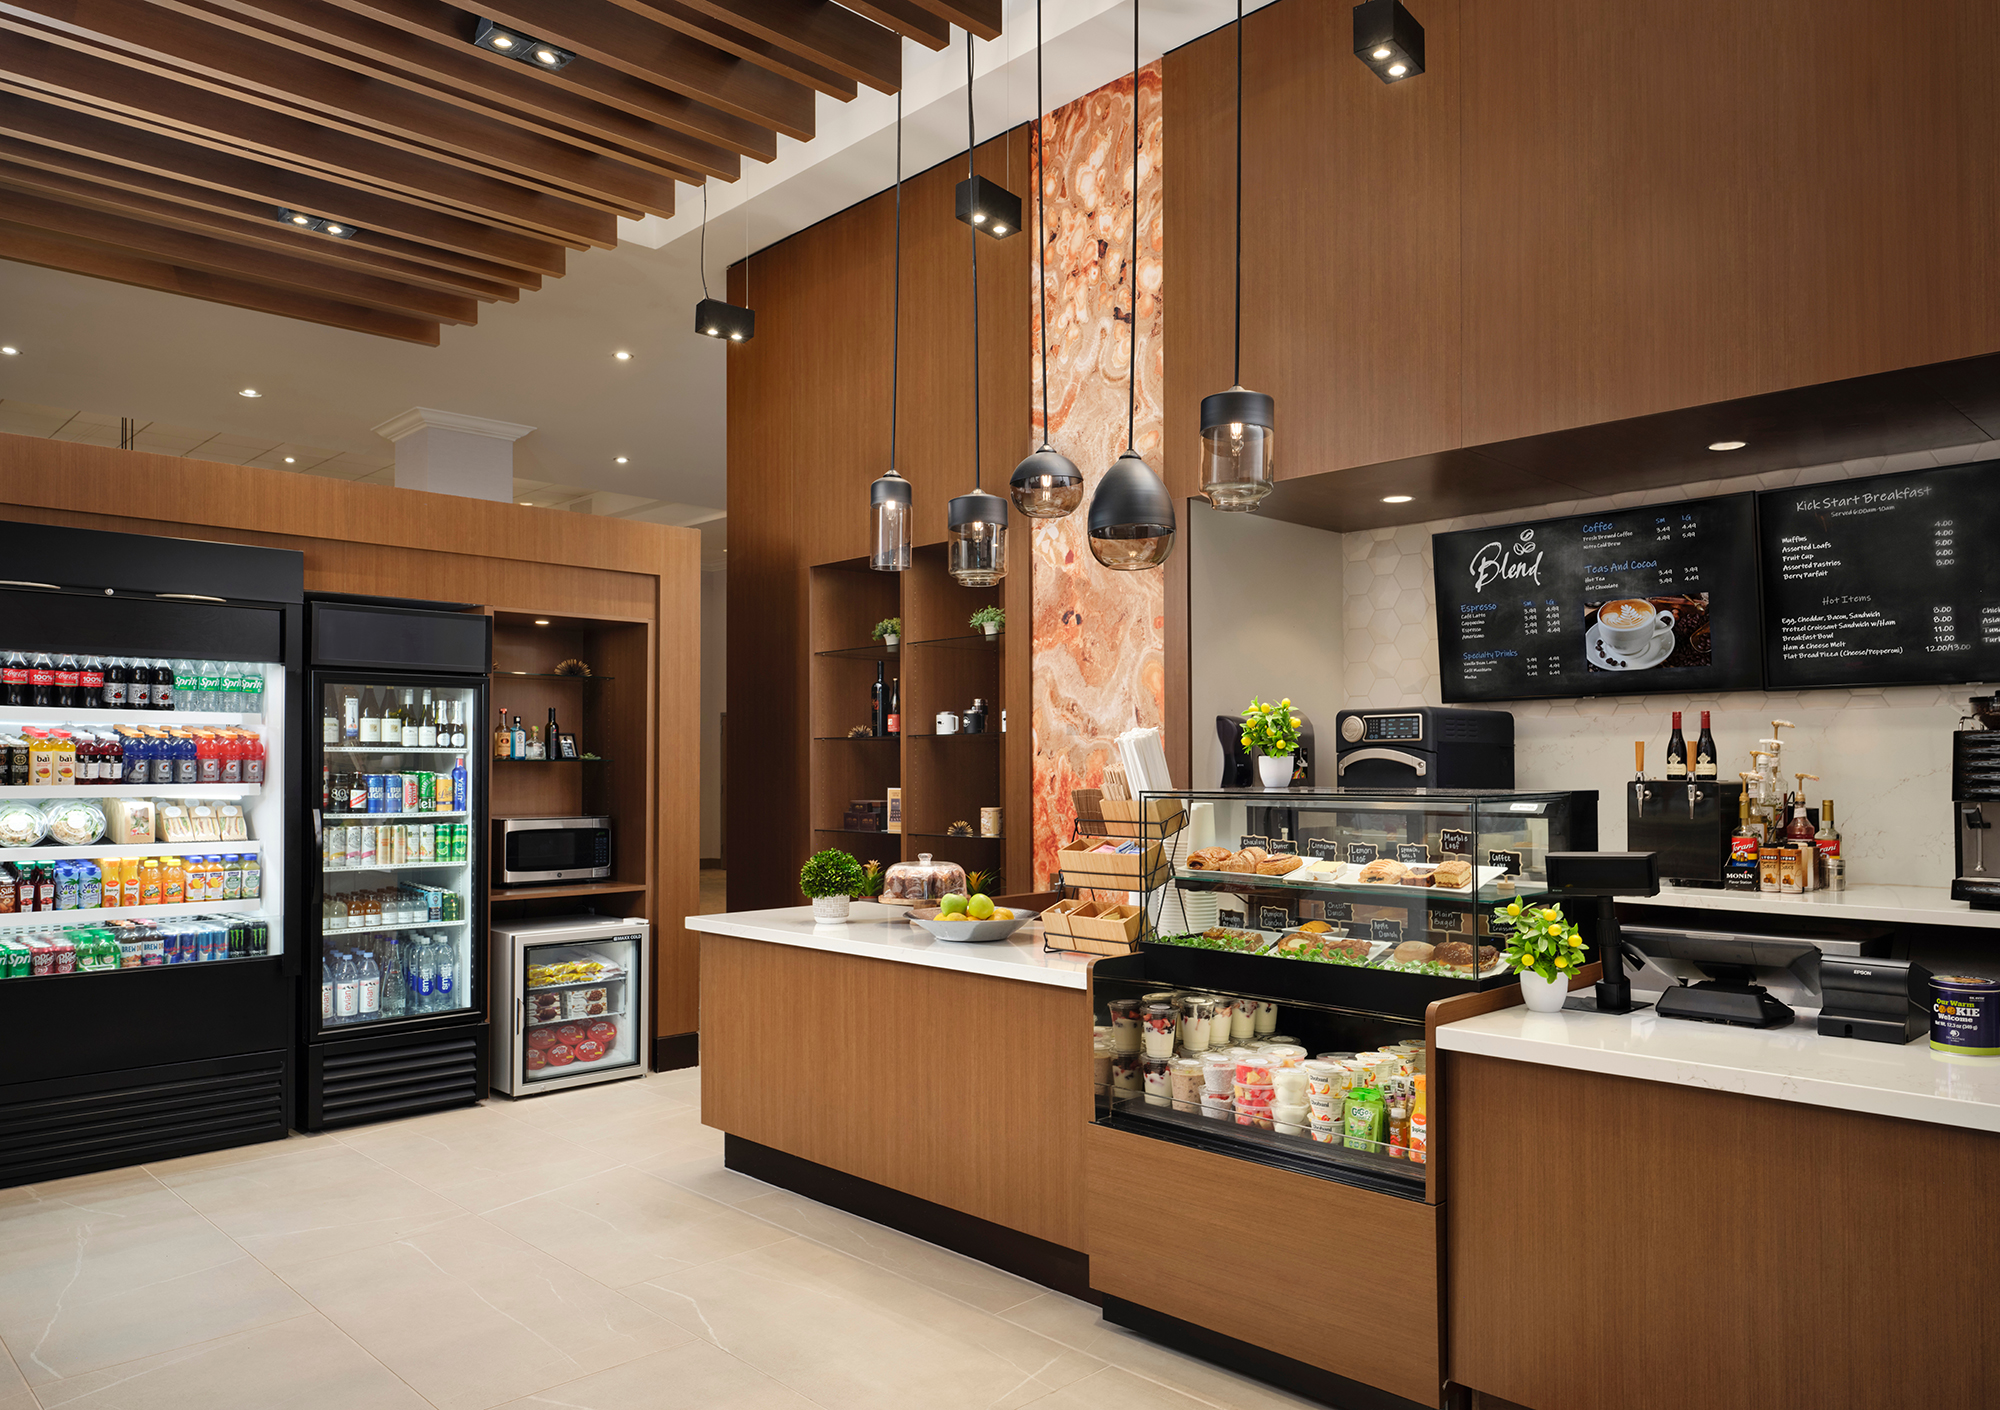 Grab-and-go Cafe at Hotel Zessa in Santa Ana